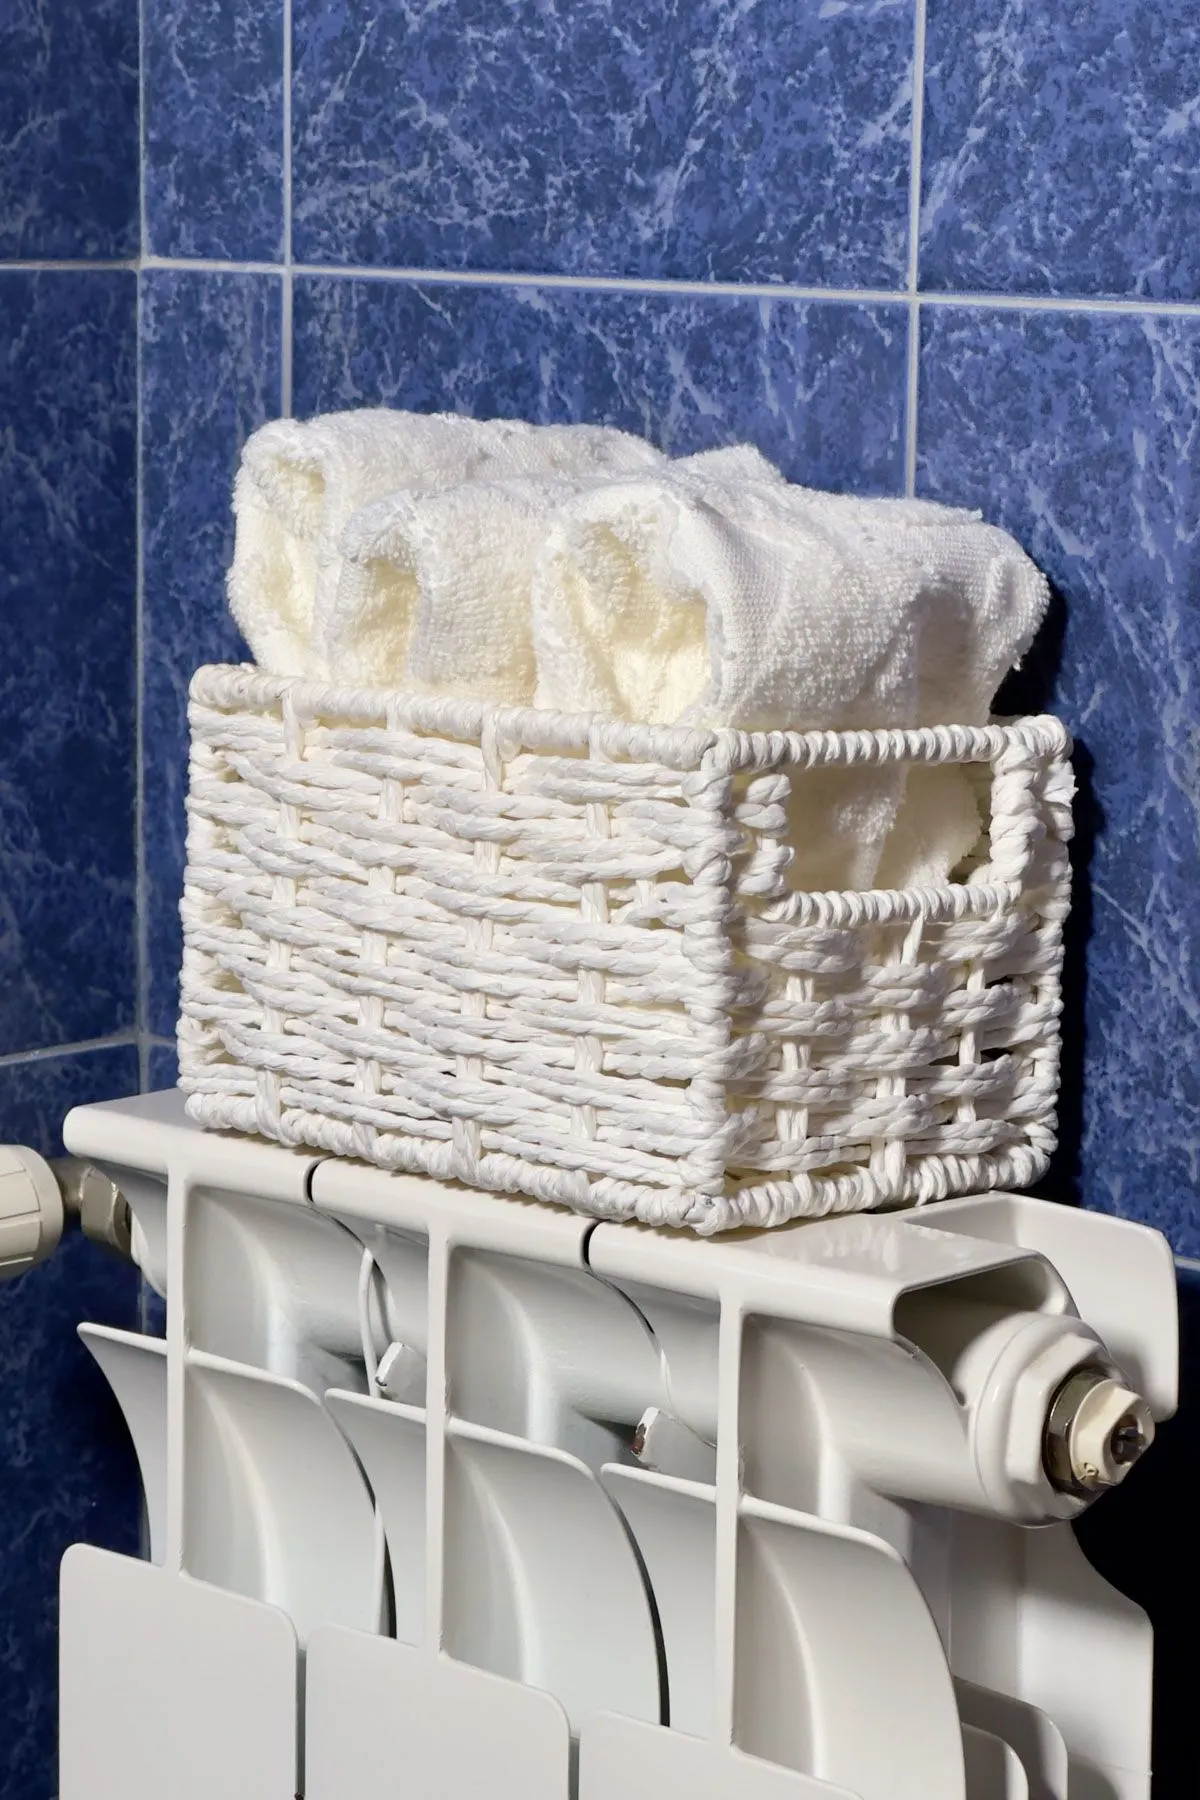 Place A Basket With Hand Towels On The Radiator